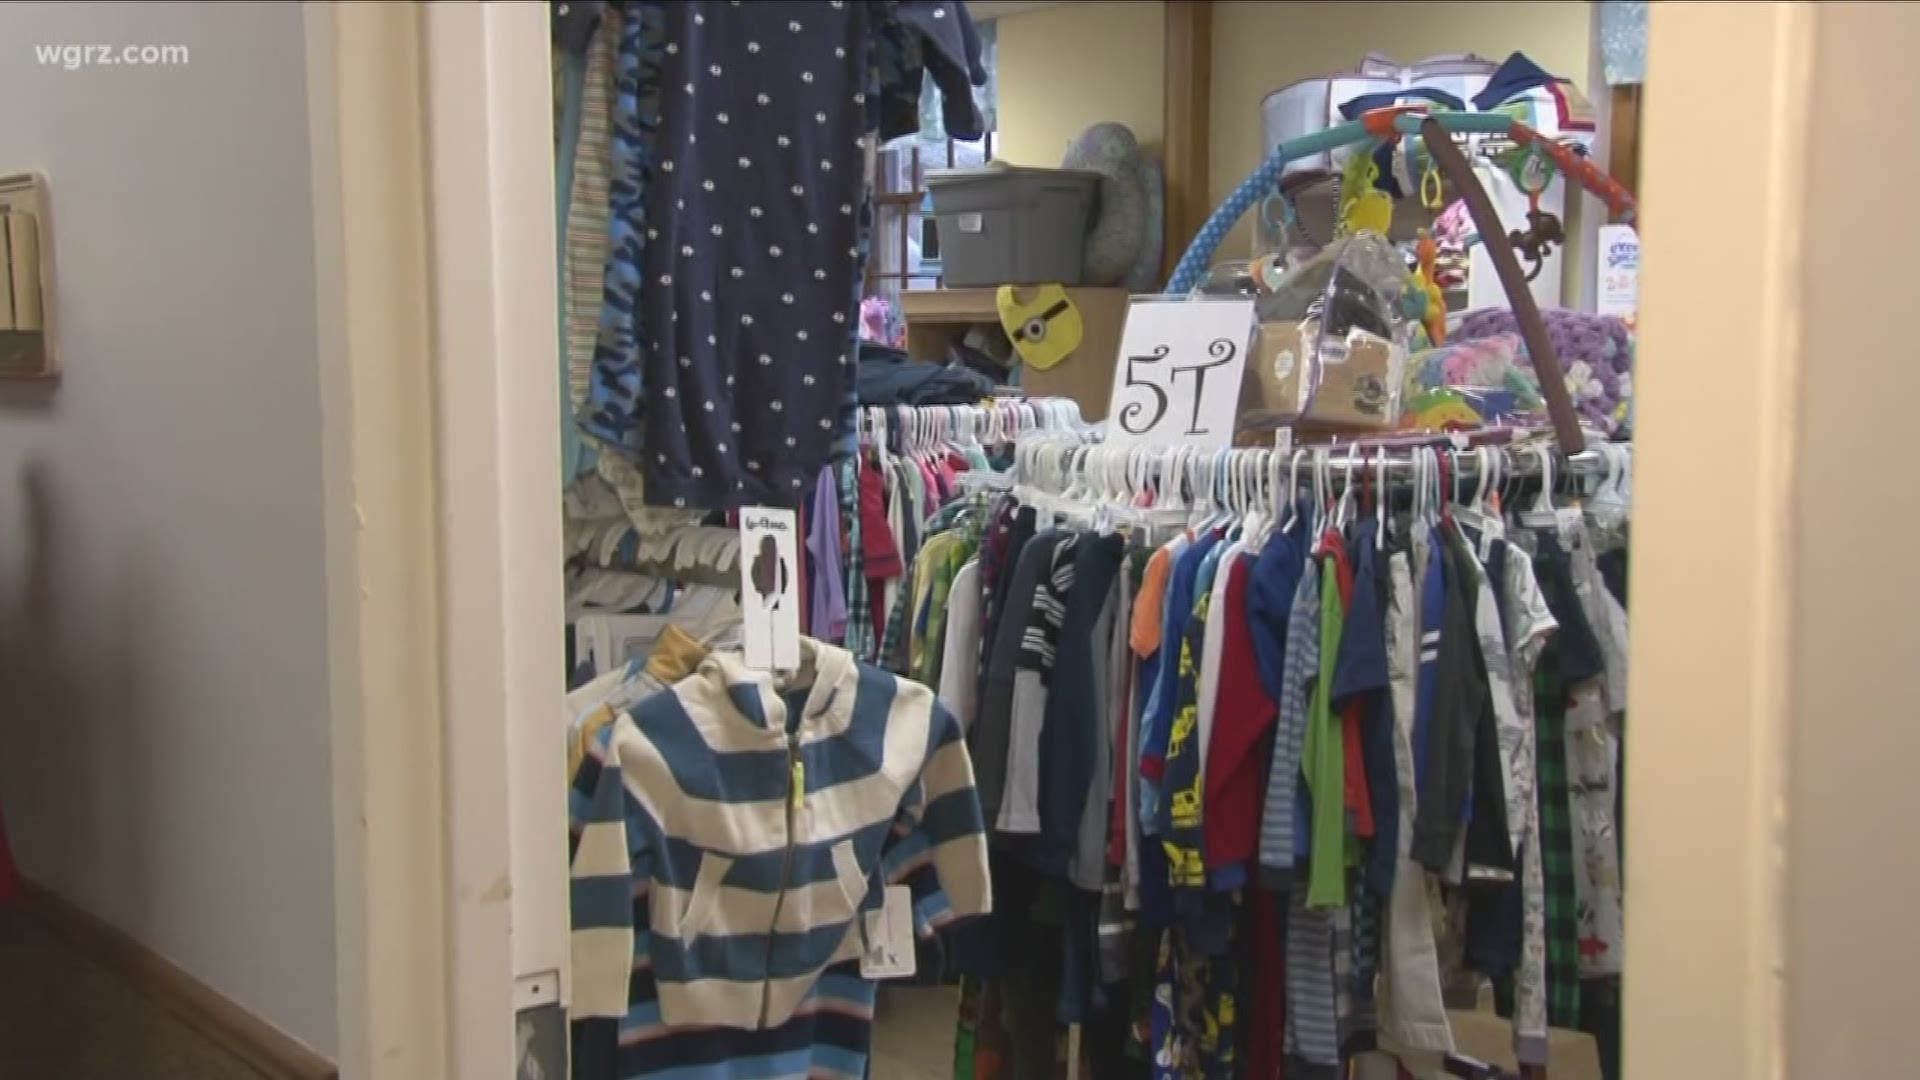 the foster love closet has helped more than 100 families.